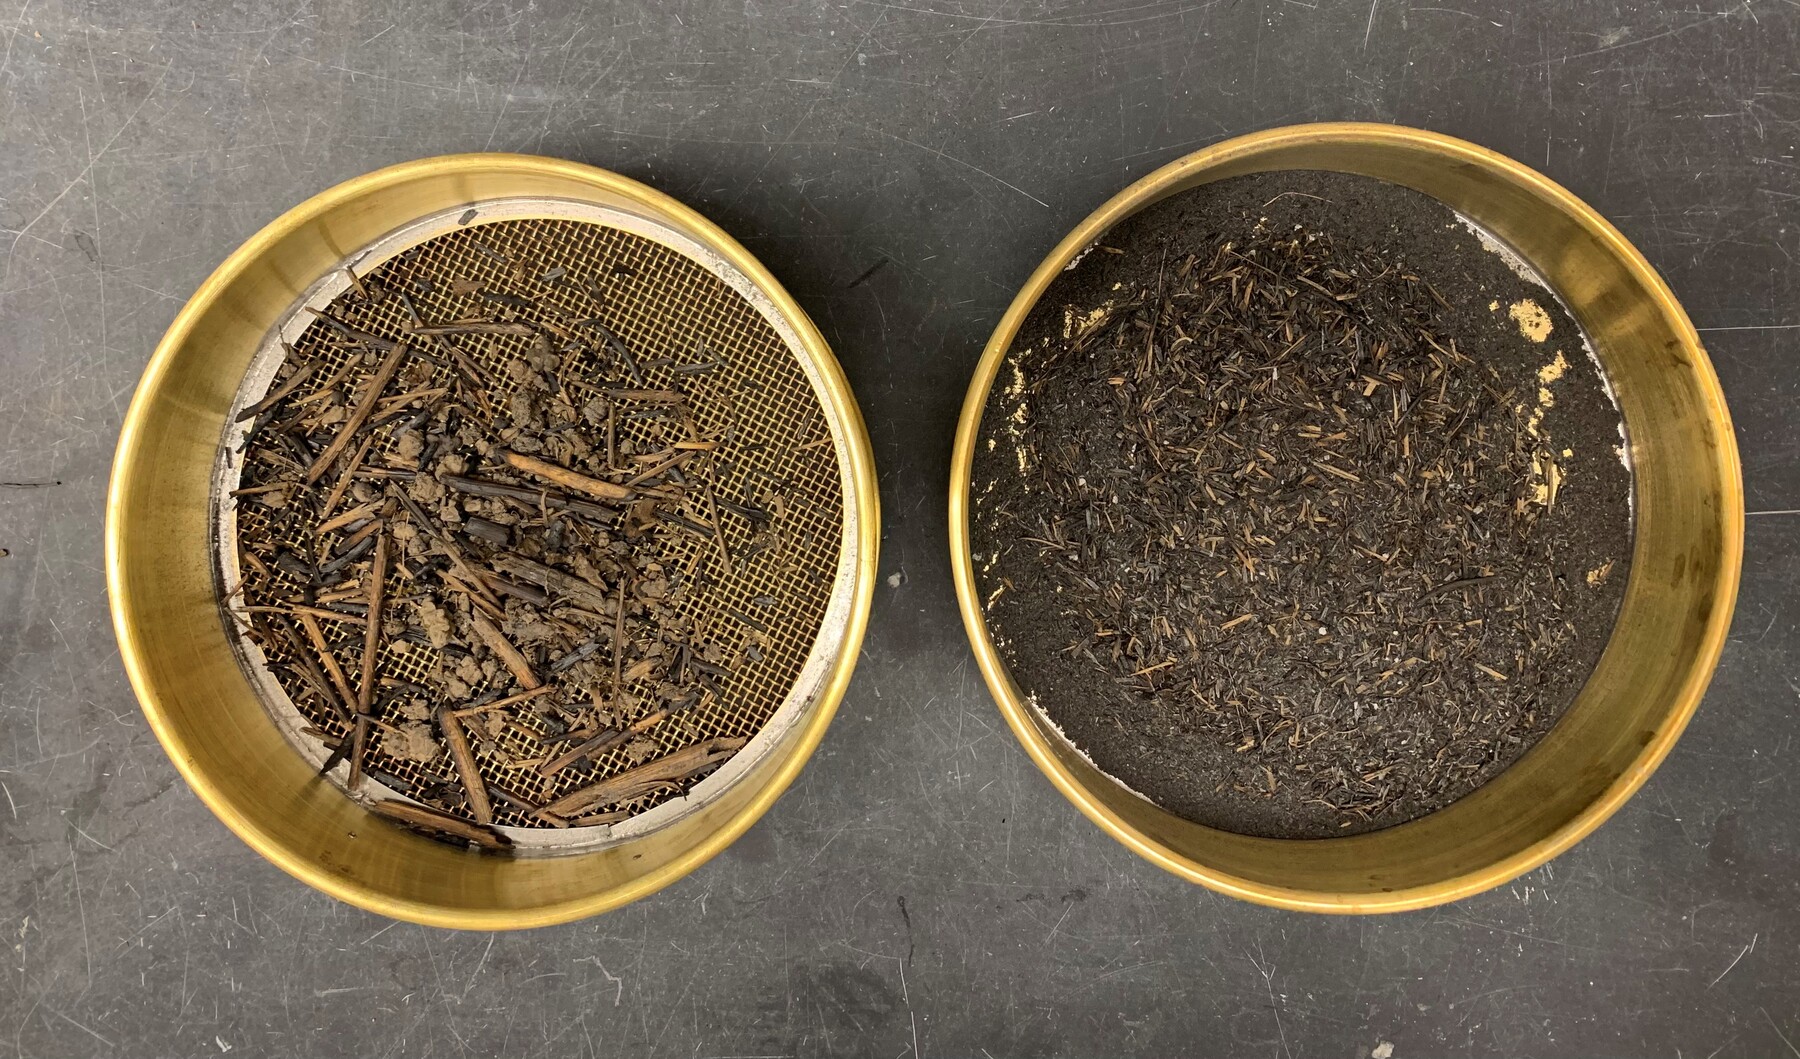 Charcoal from modern prescribed burn being analyzed in the ISAS Environmental Archaeology Lab.